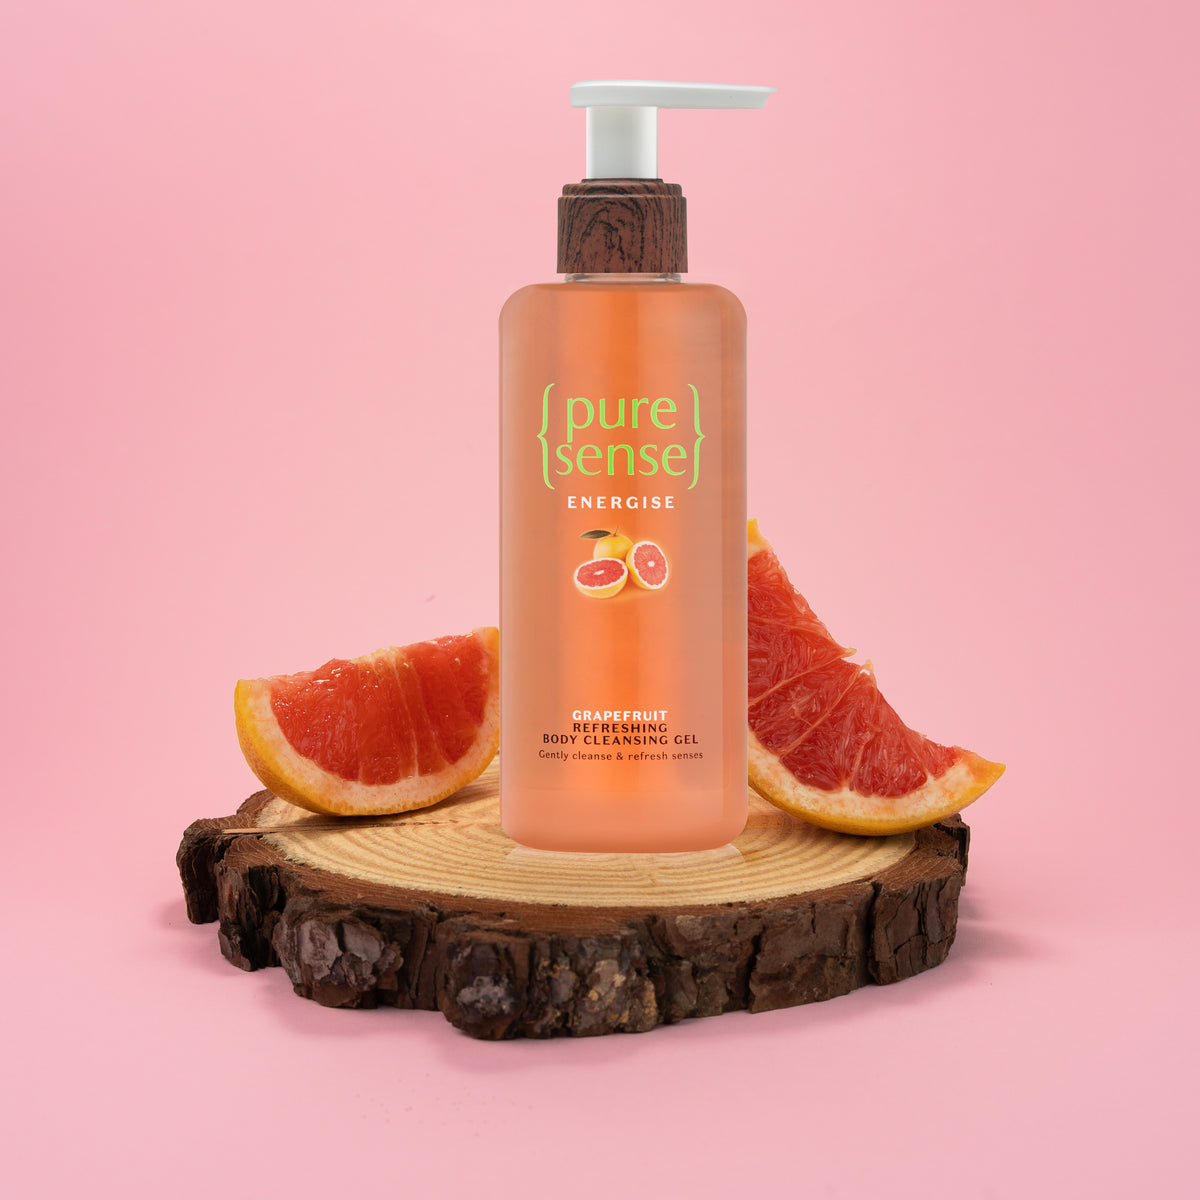 Energise Grapefruit Refreshing Body Cleansing Gel | From the makers of Parachute Advansed | 200ml